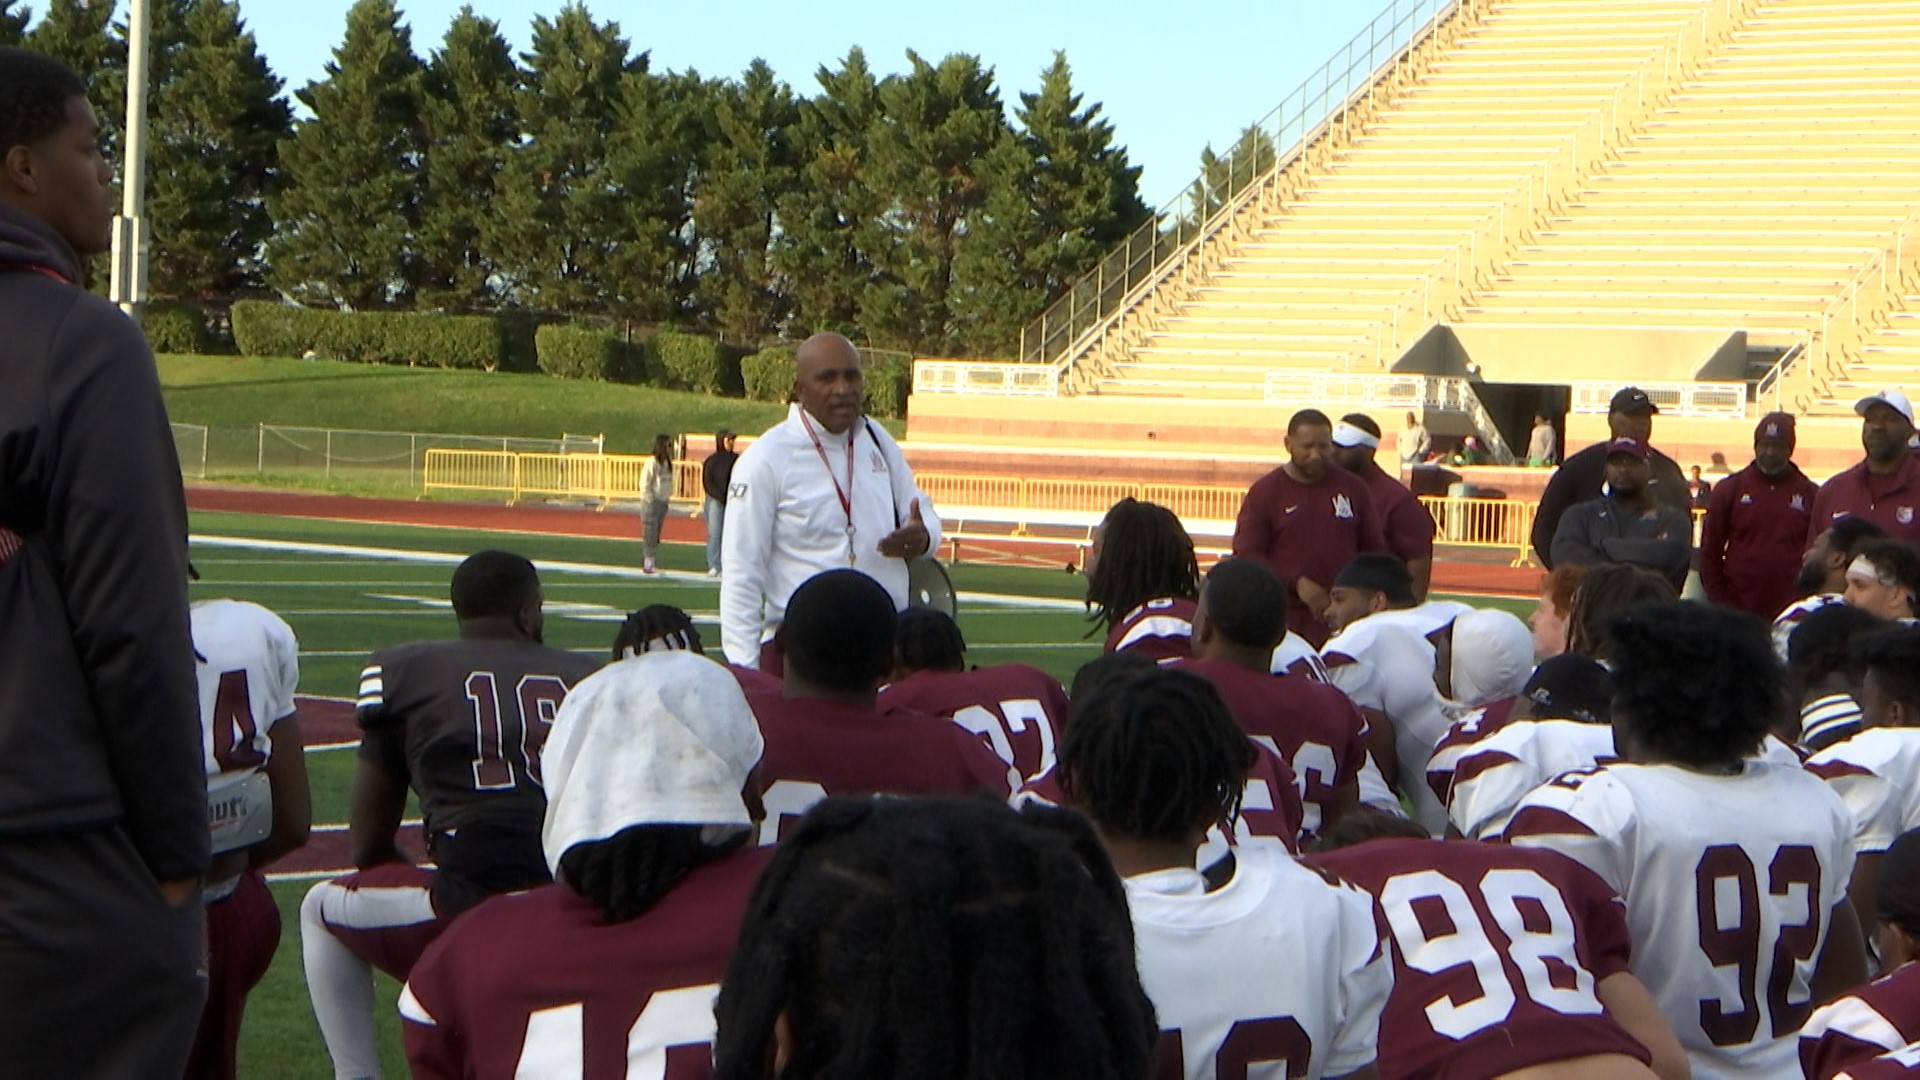 Xavier Laknford threw a TD pass to Duke Miller in overtime to lift the AAMU Maroon Team past the AAMU White Team, 28-21 in the annual Maroon and White Spring Game.